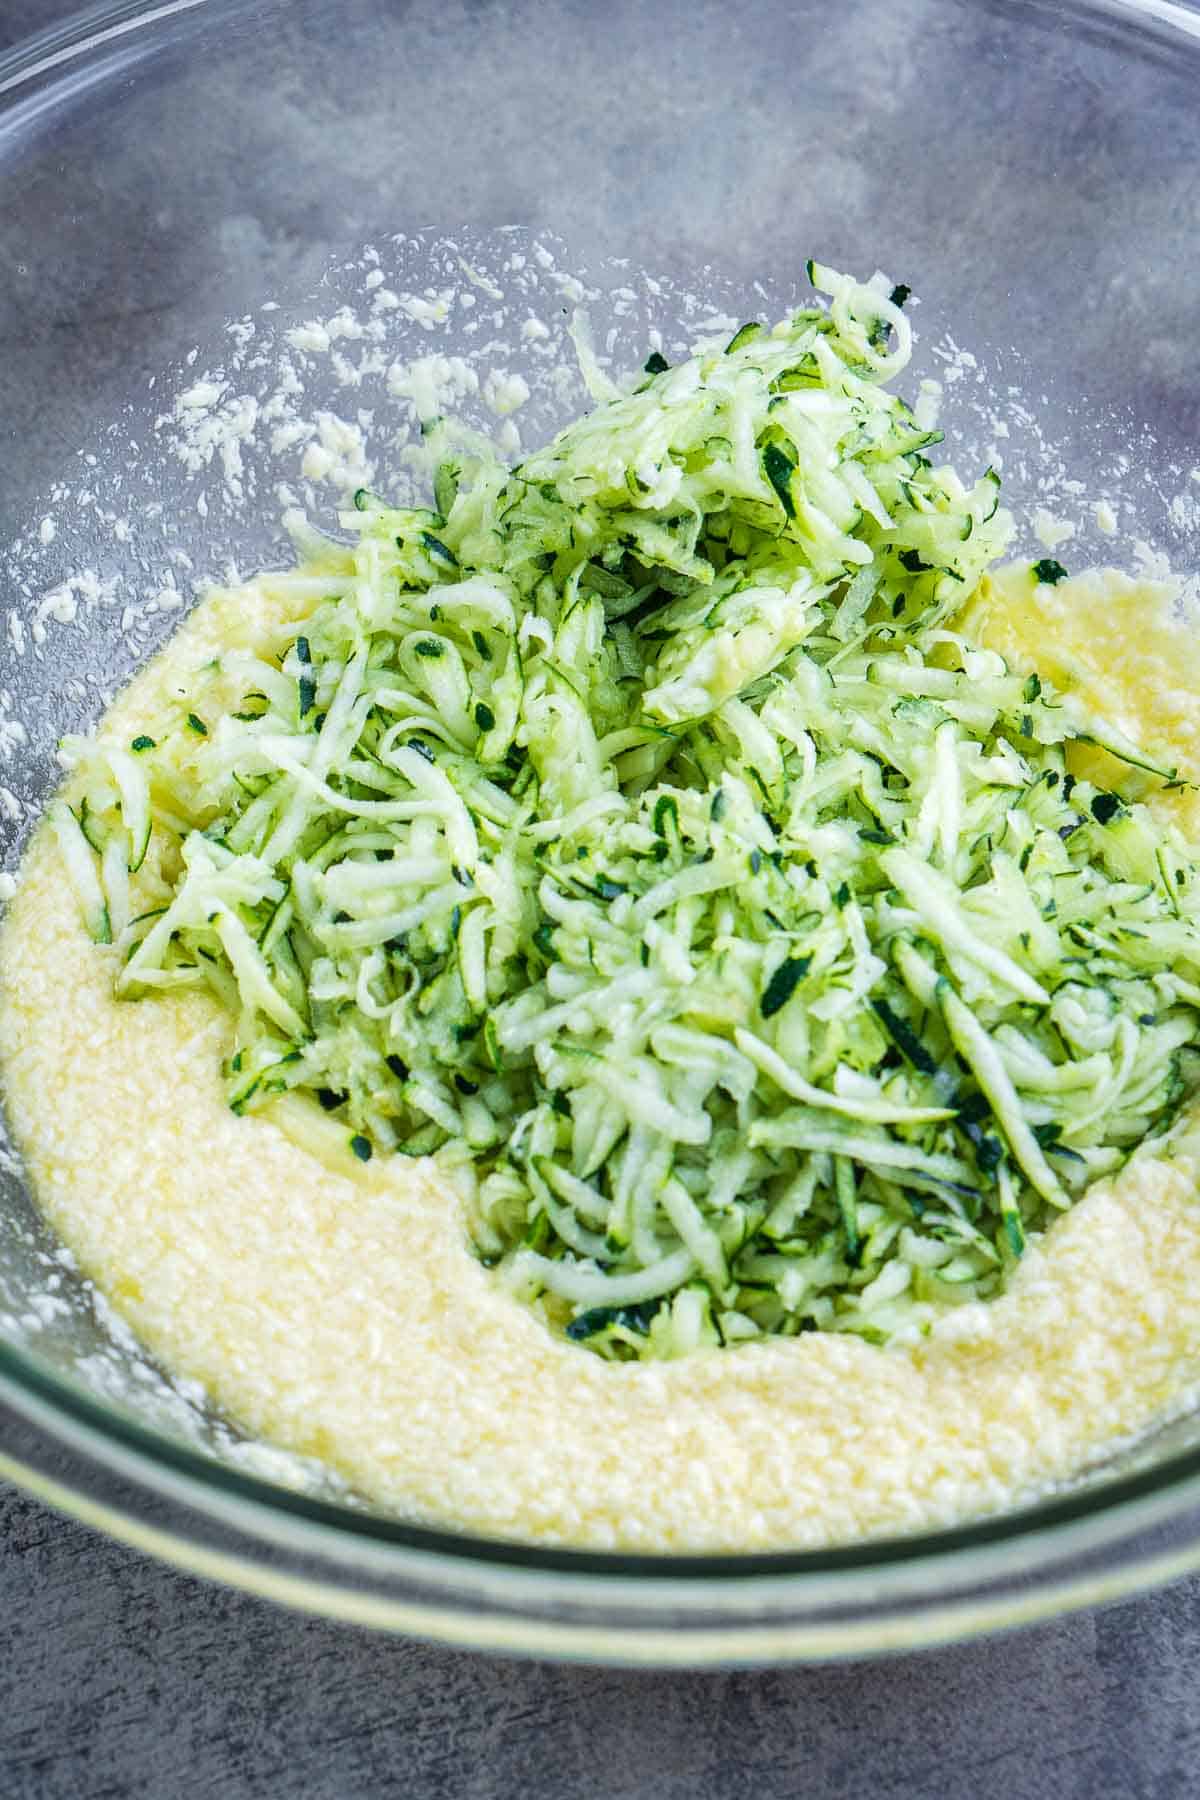 freshly shredded zucchini sits on wet mixture in glass bowl